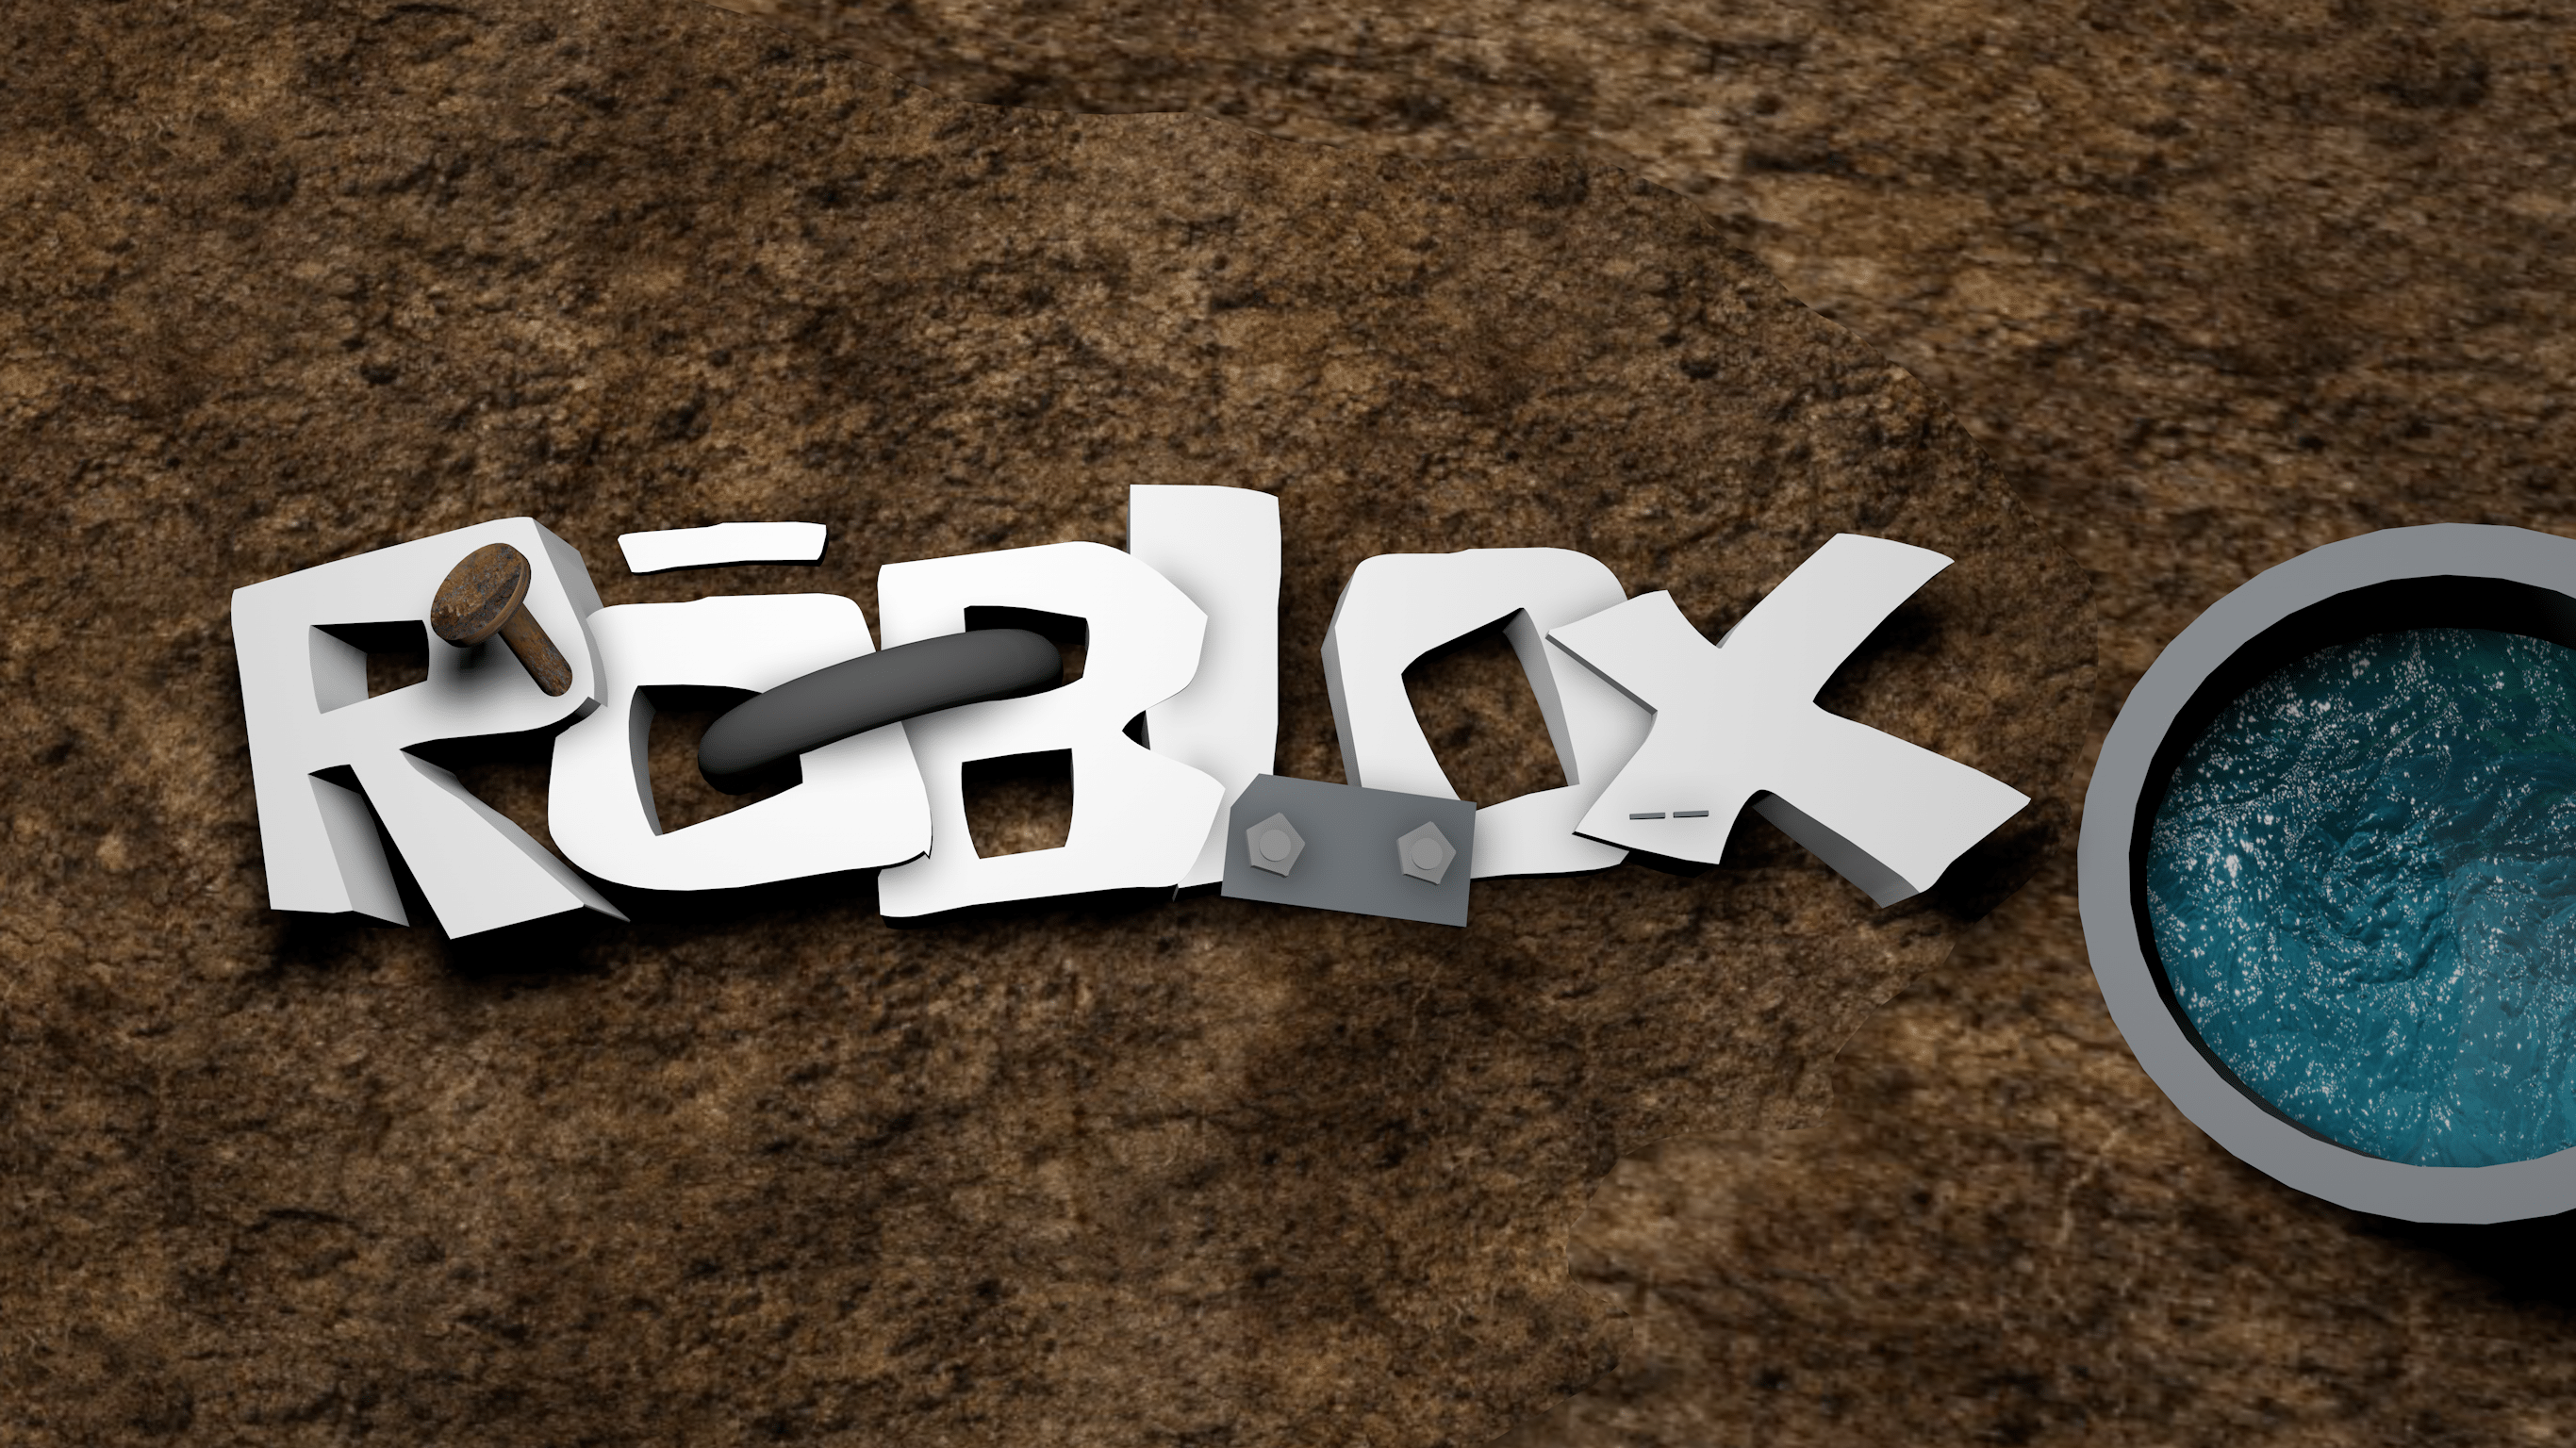 Roblox Logo Wallpapers Top Free Roblox Logo Backgrounds Wallpaperaccess - aesthetic wallpaper for roblox logo